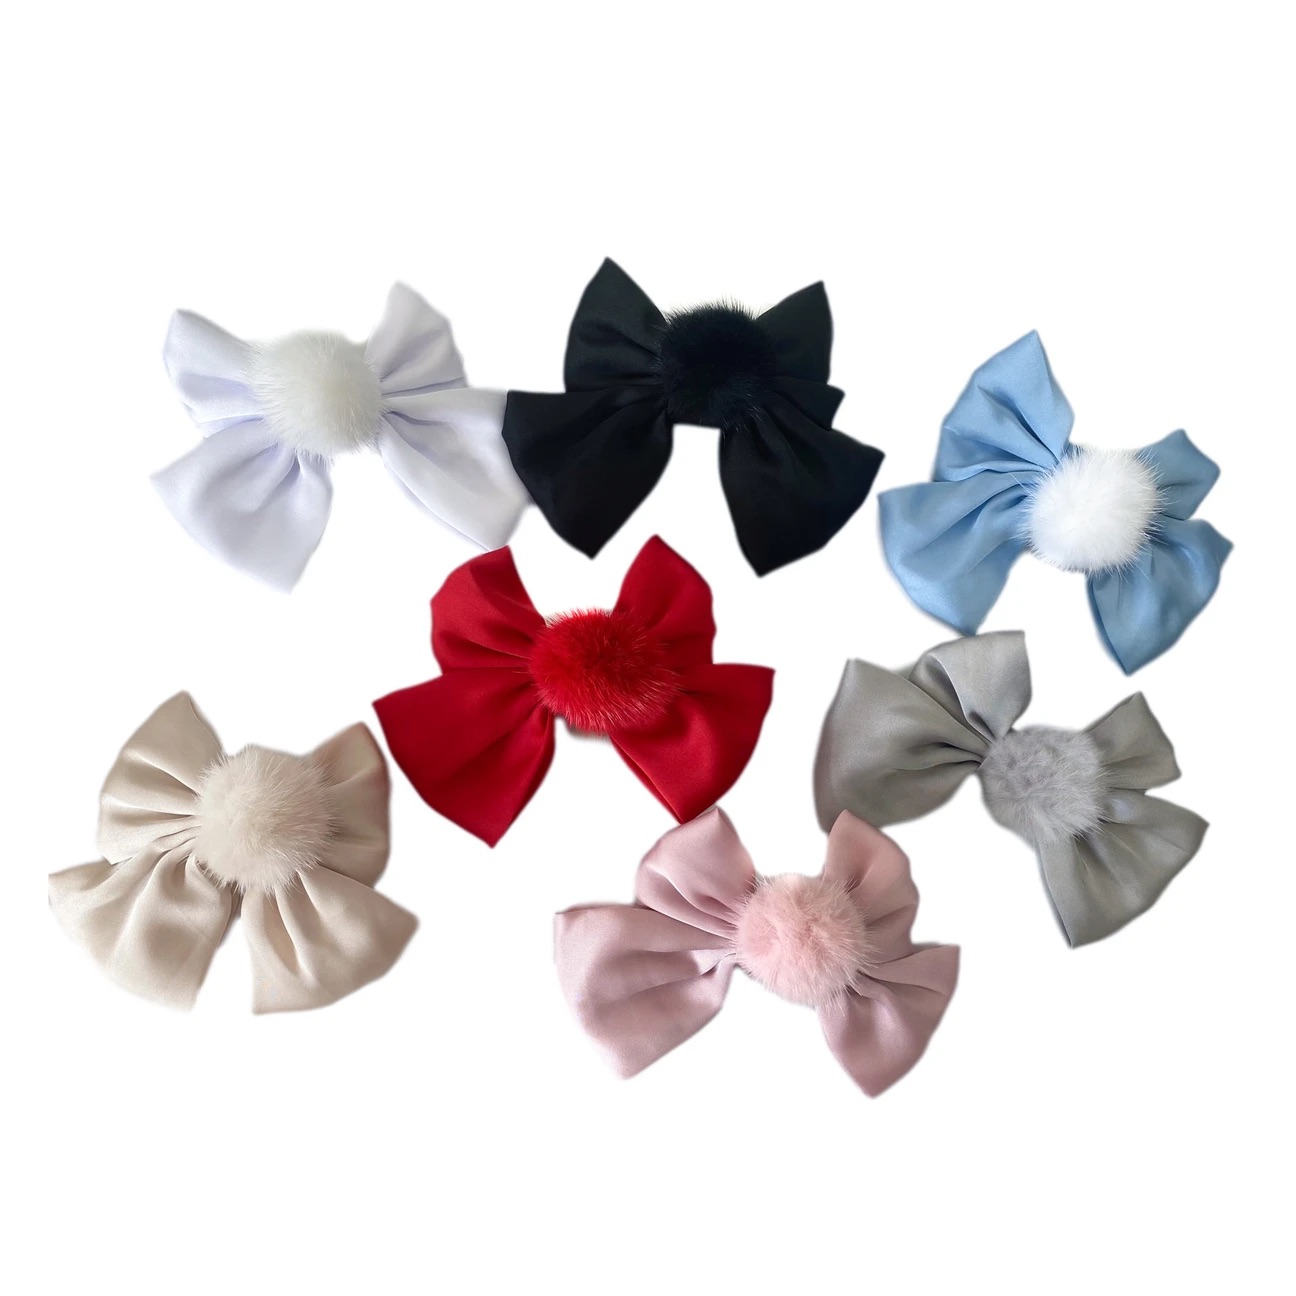 Lana Bow Headband: Step by Step on How To Tie A Big Bow